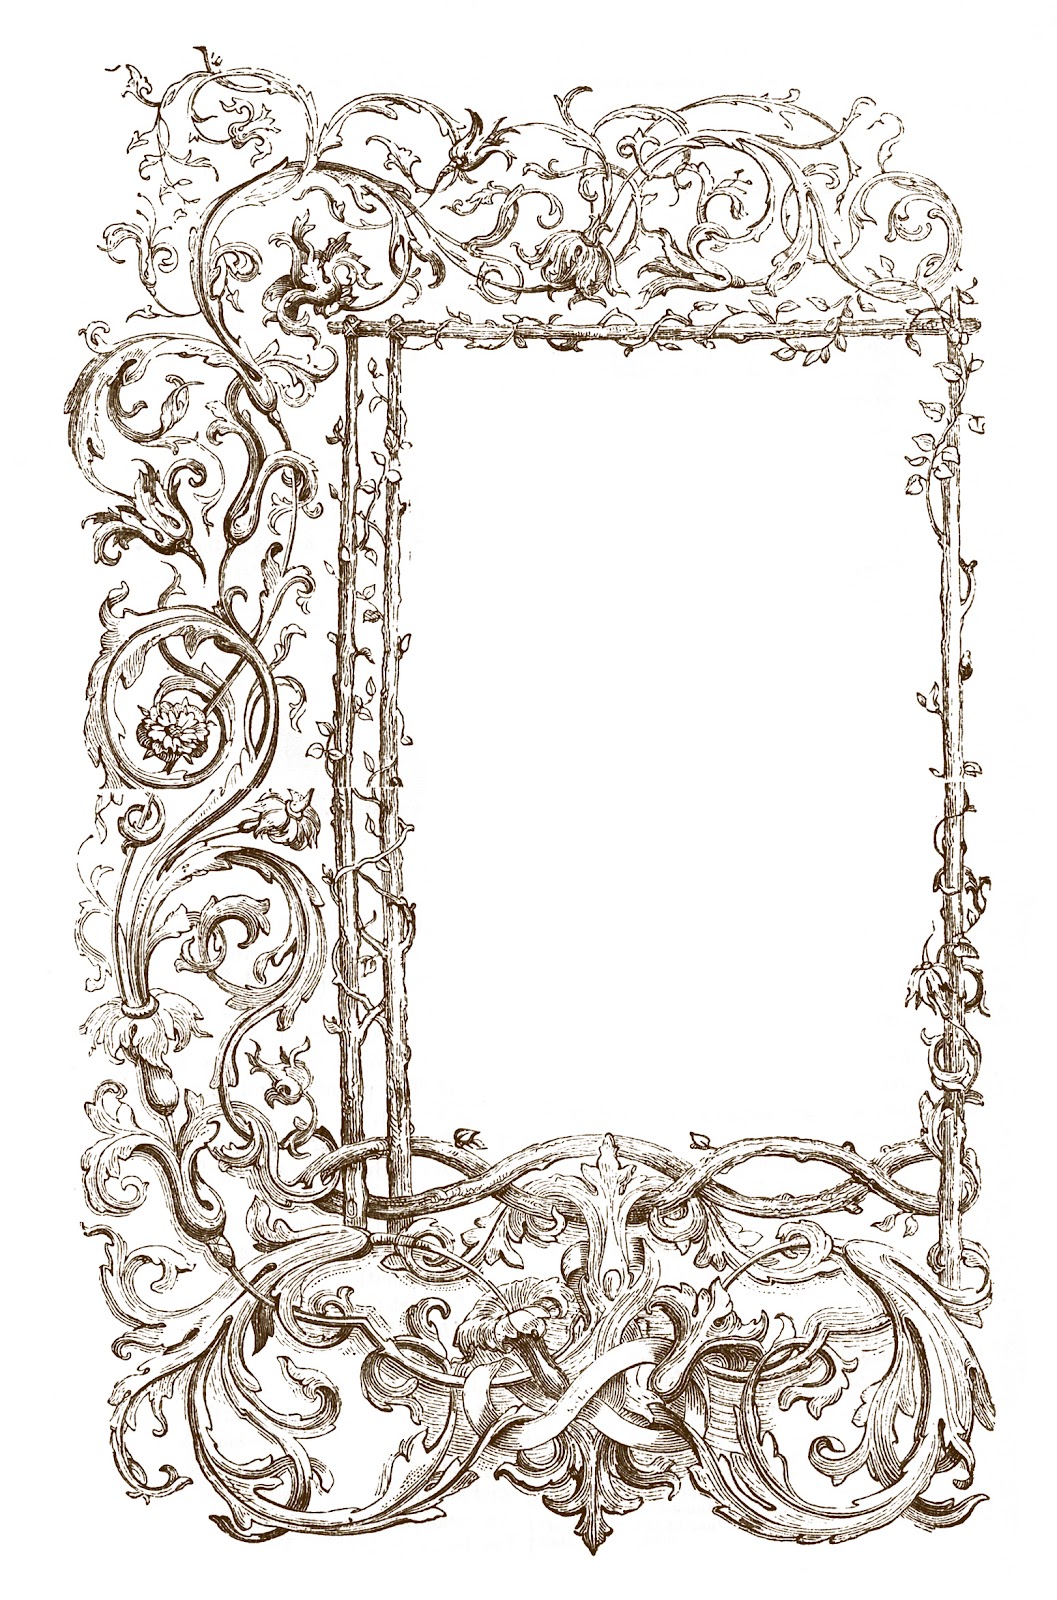 Vintage Clip Art - Faux Bois Frames with Scrolls - The Graphics Fairy